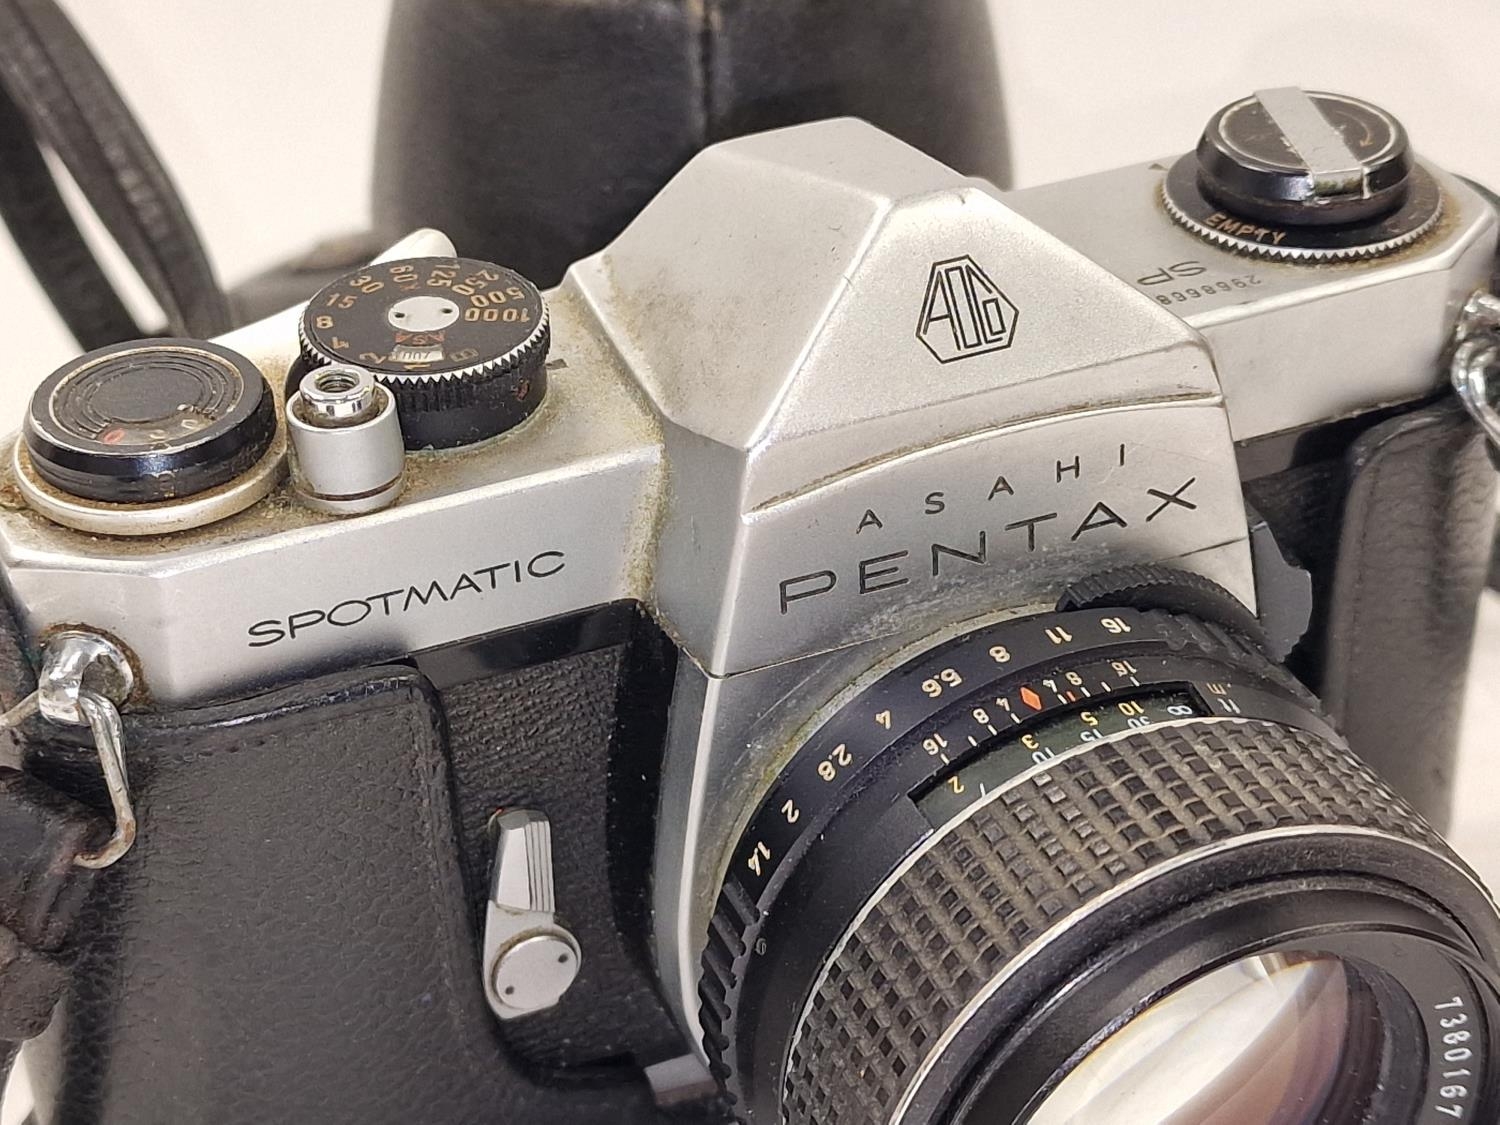 Asahi Pentax Spotmatic camera shutter fires but not tested further. - Image 2 of 2